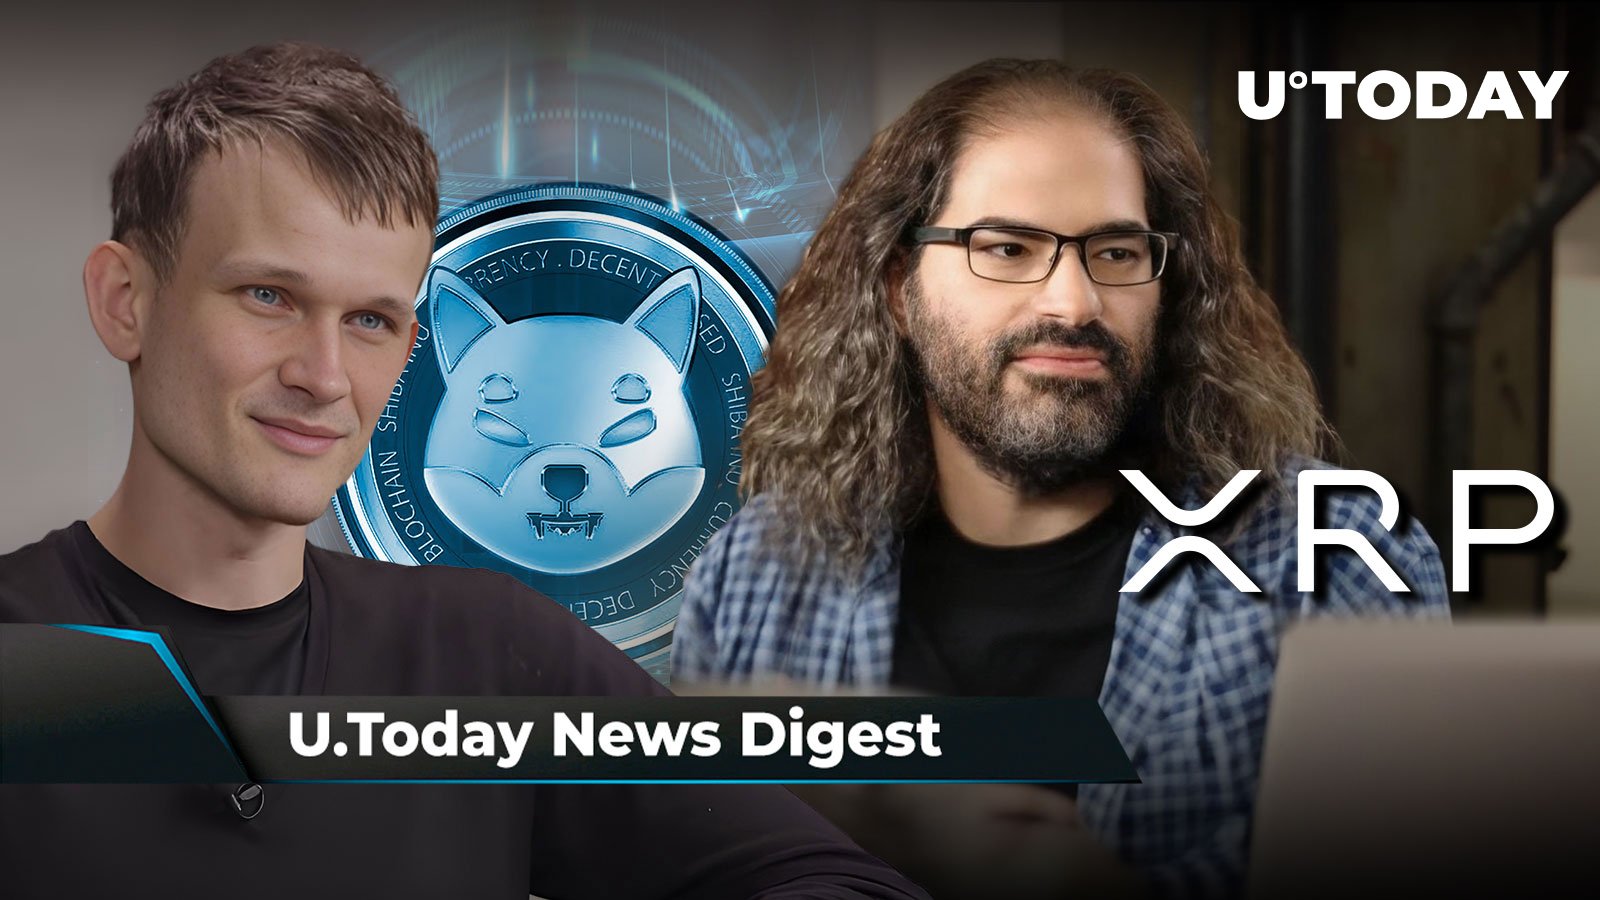 Vitalik Buterin Makes Unexpected SHIB Post, Shiba Inu Lead Kusama Replies; Ripple CTO Says It's 'Nearly Impossible' to Avoid Selling XRP: Crypto News Digest by U.Today